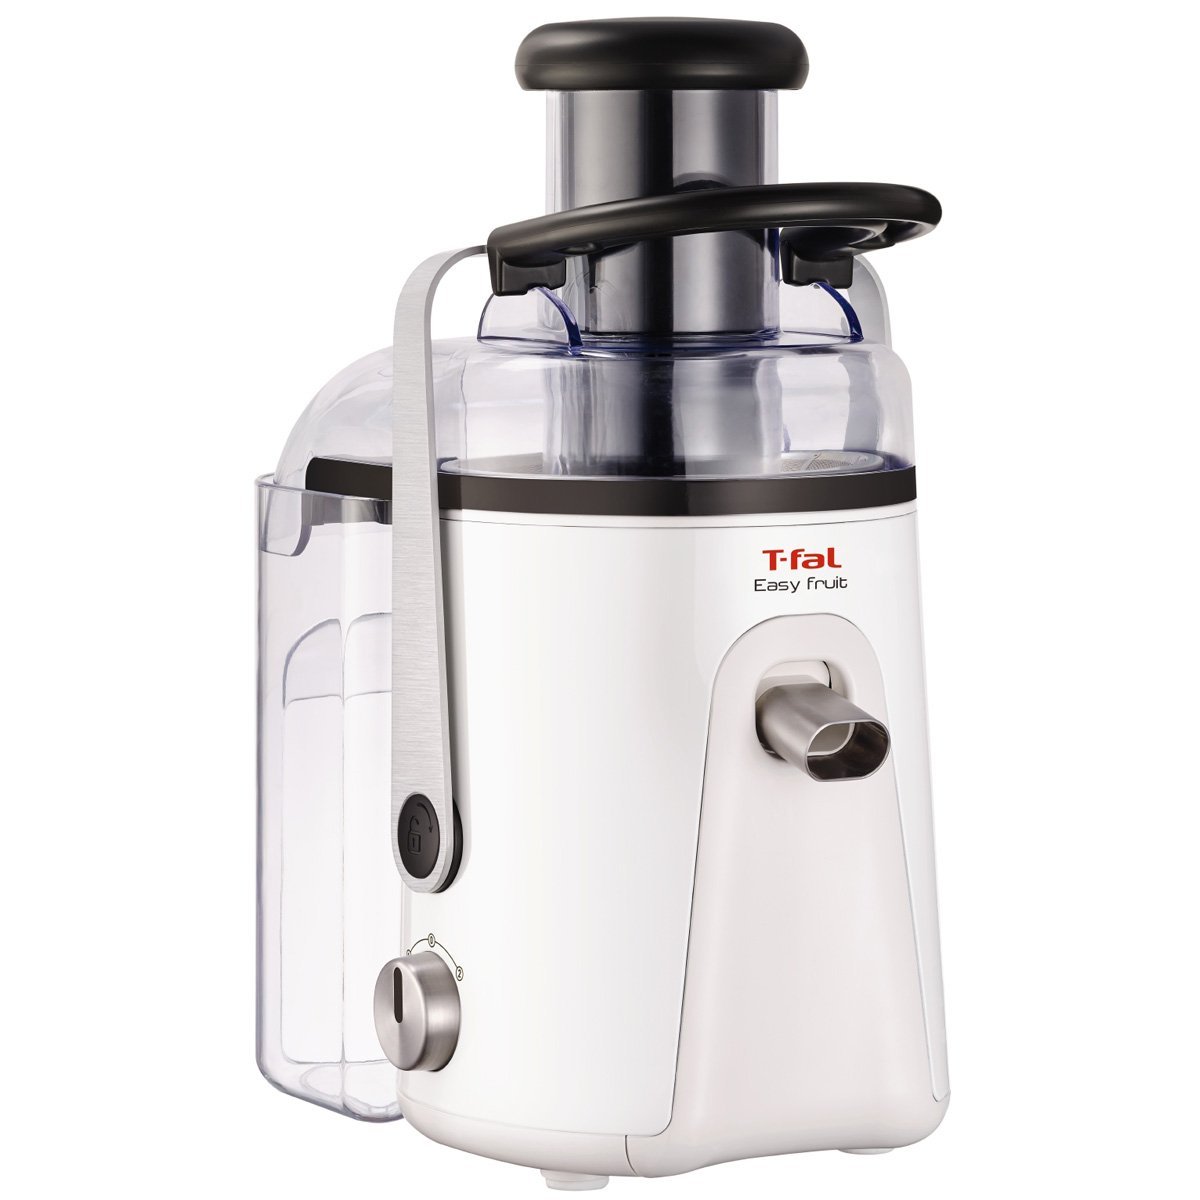 Extractor Easy Fruit Blanco T-Fal